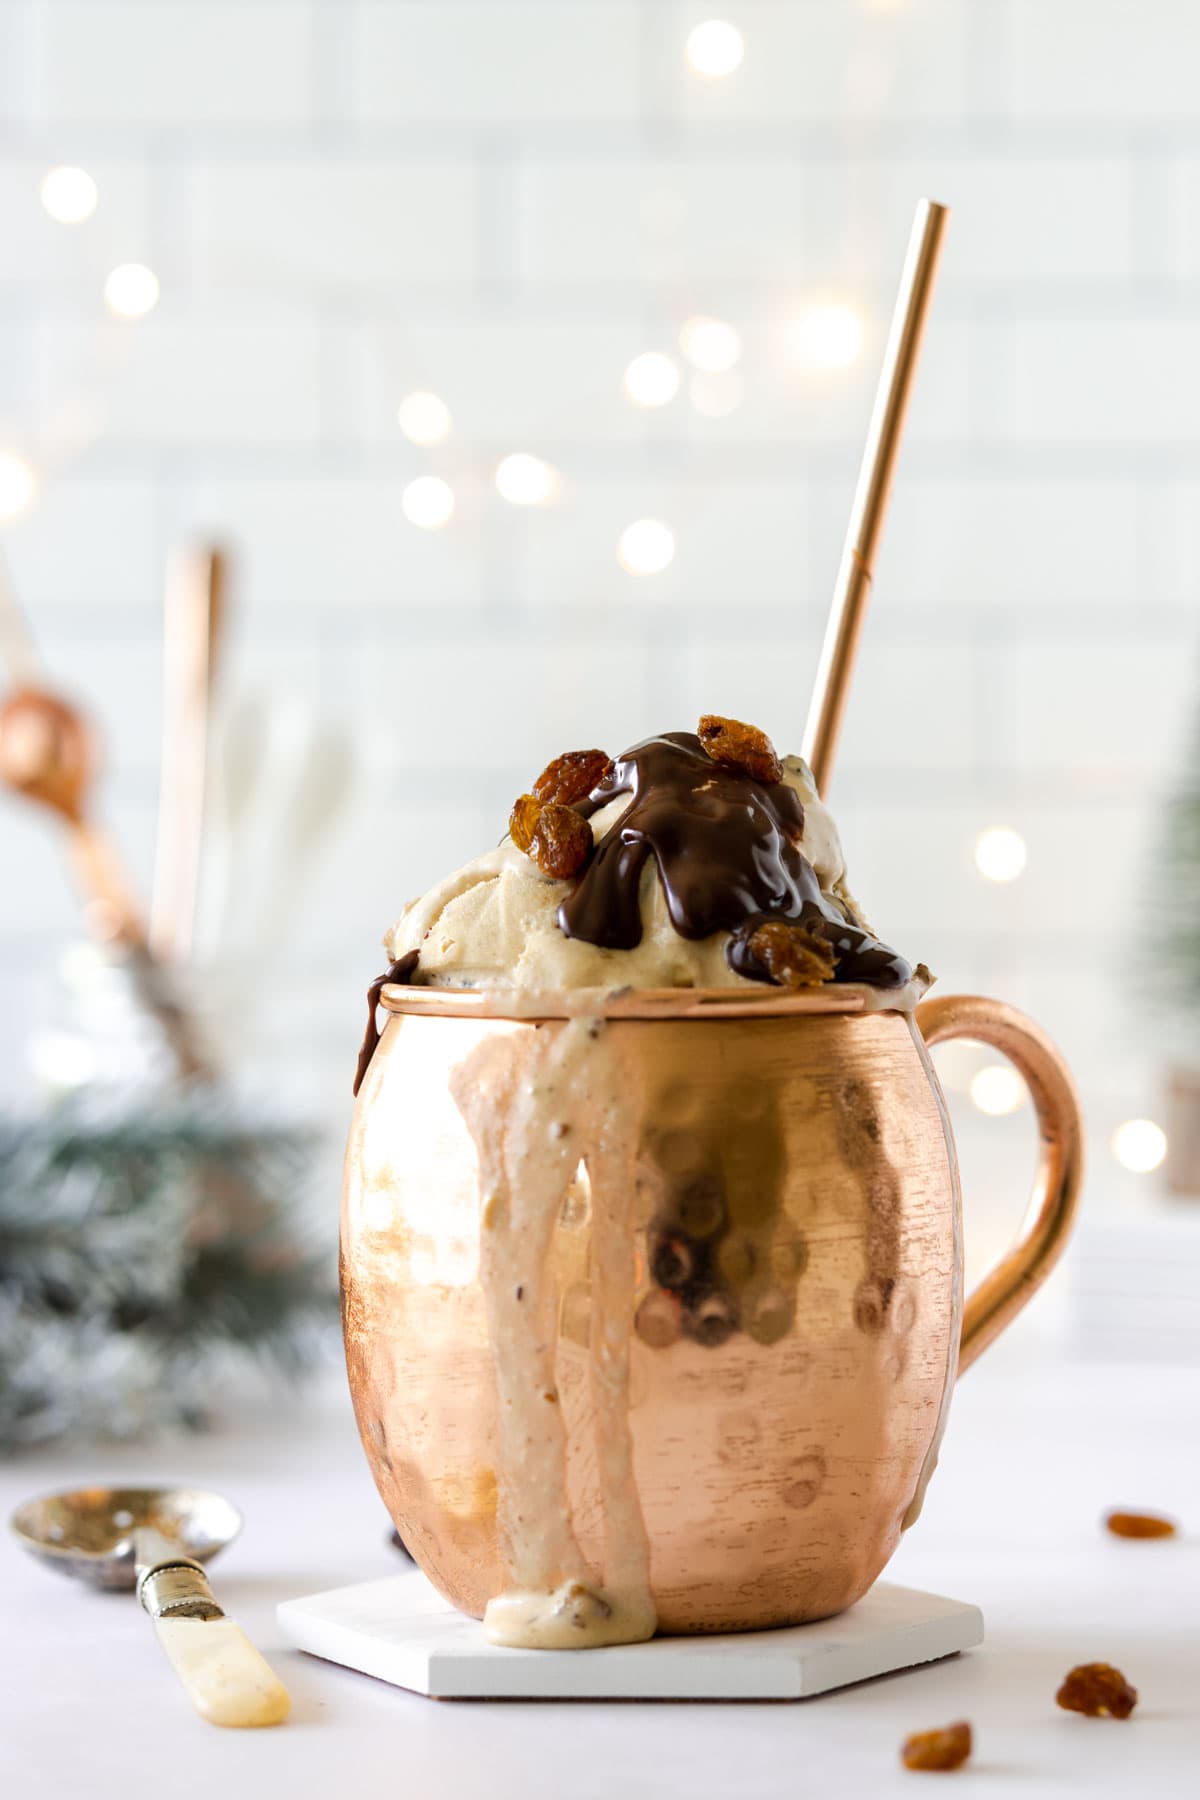 Ice cream with a chocolate topping in a copper mug, with ice cream melting down the side